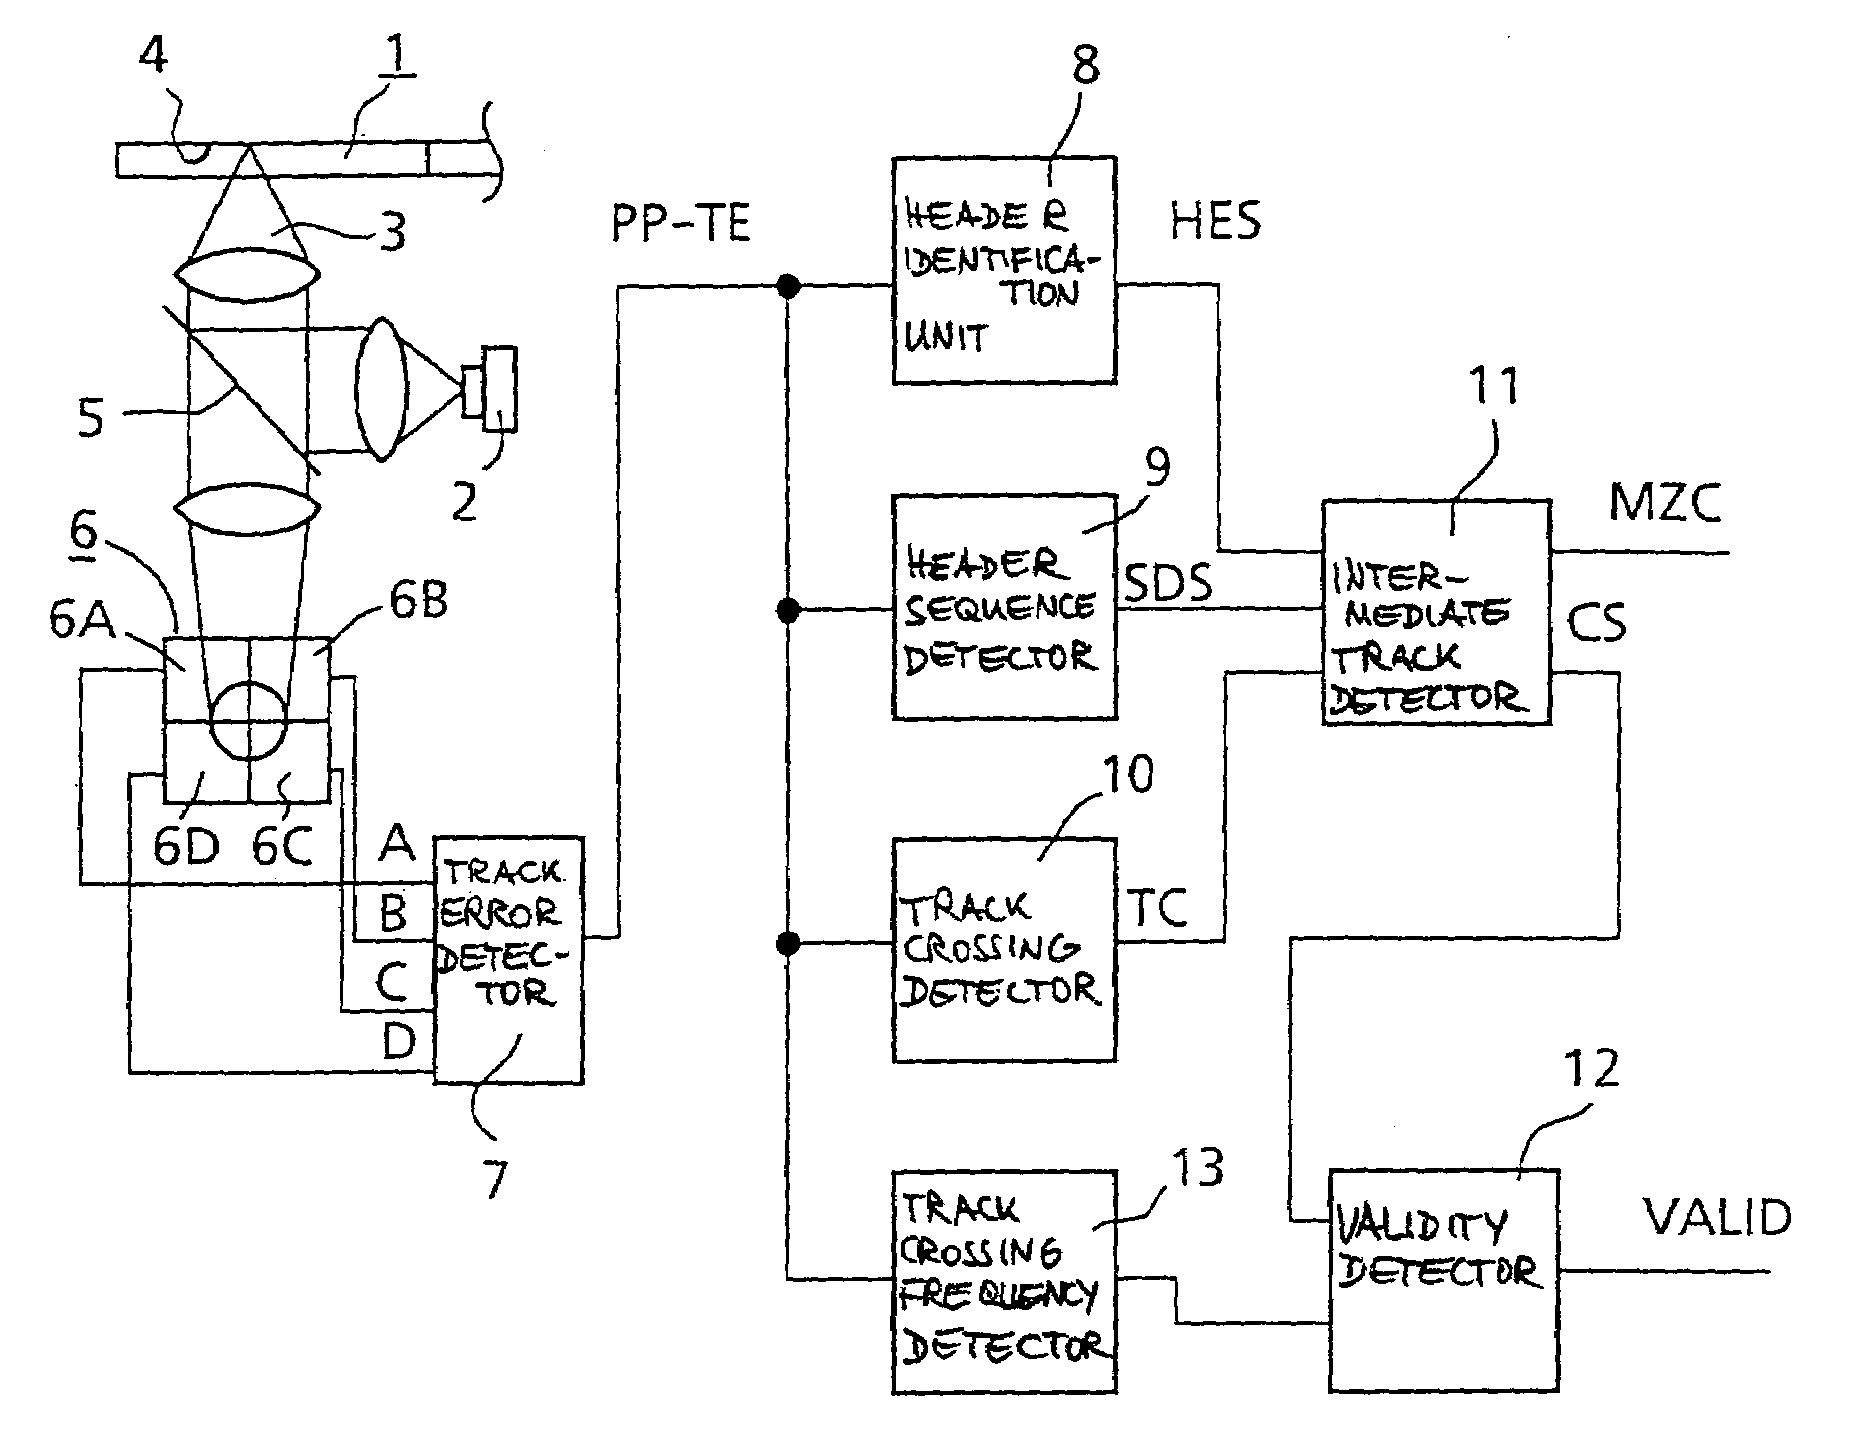 Apparatus for scanning optical recording media